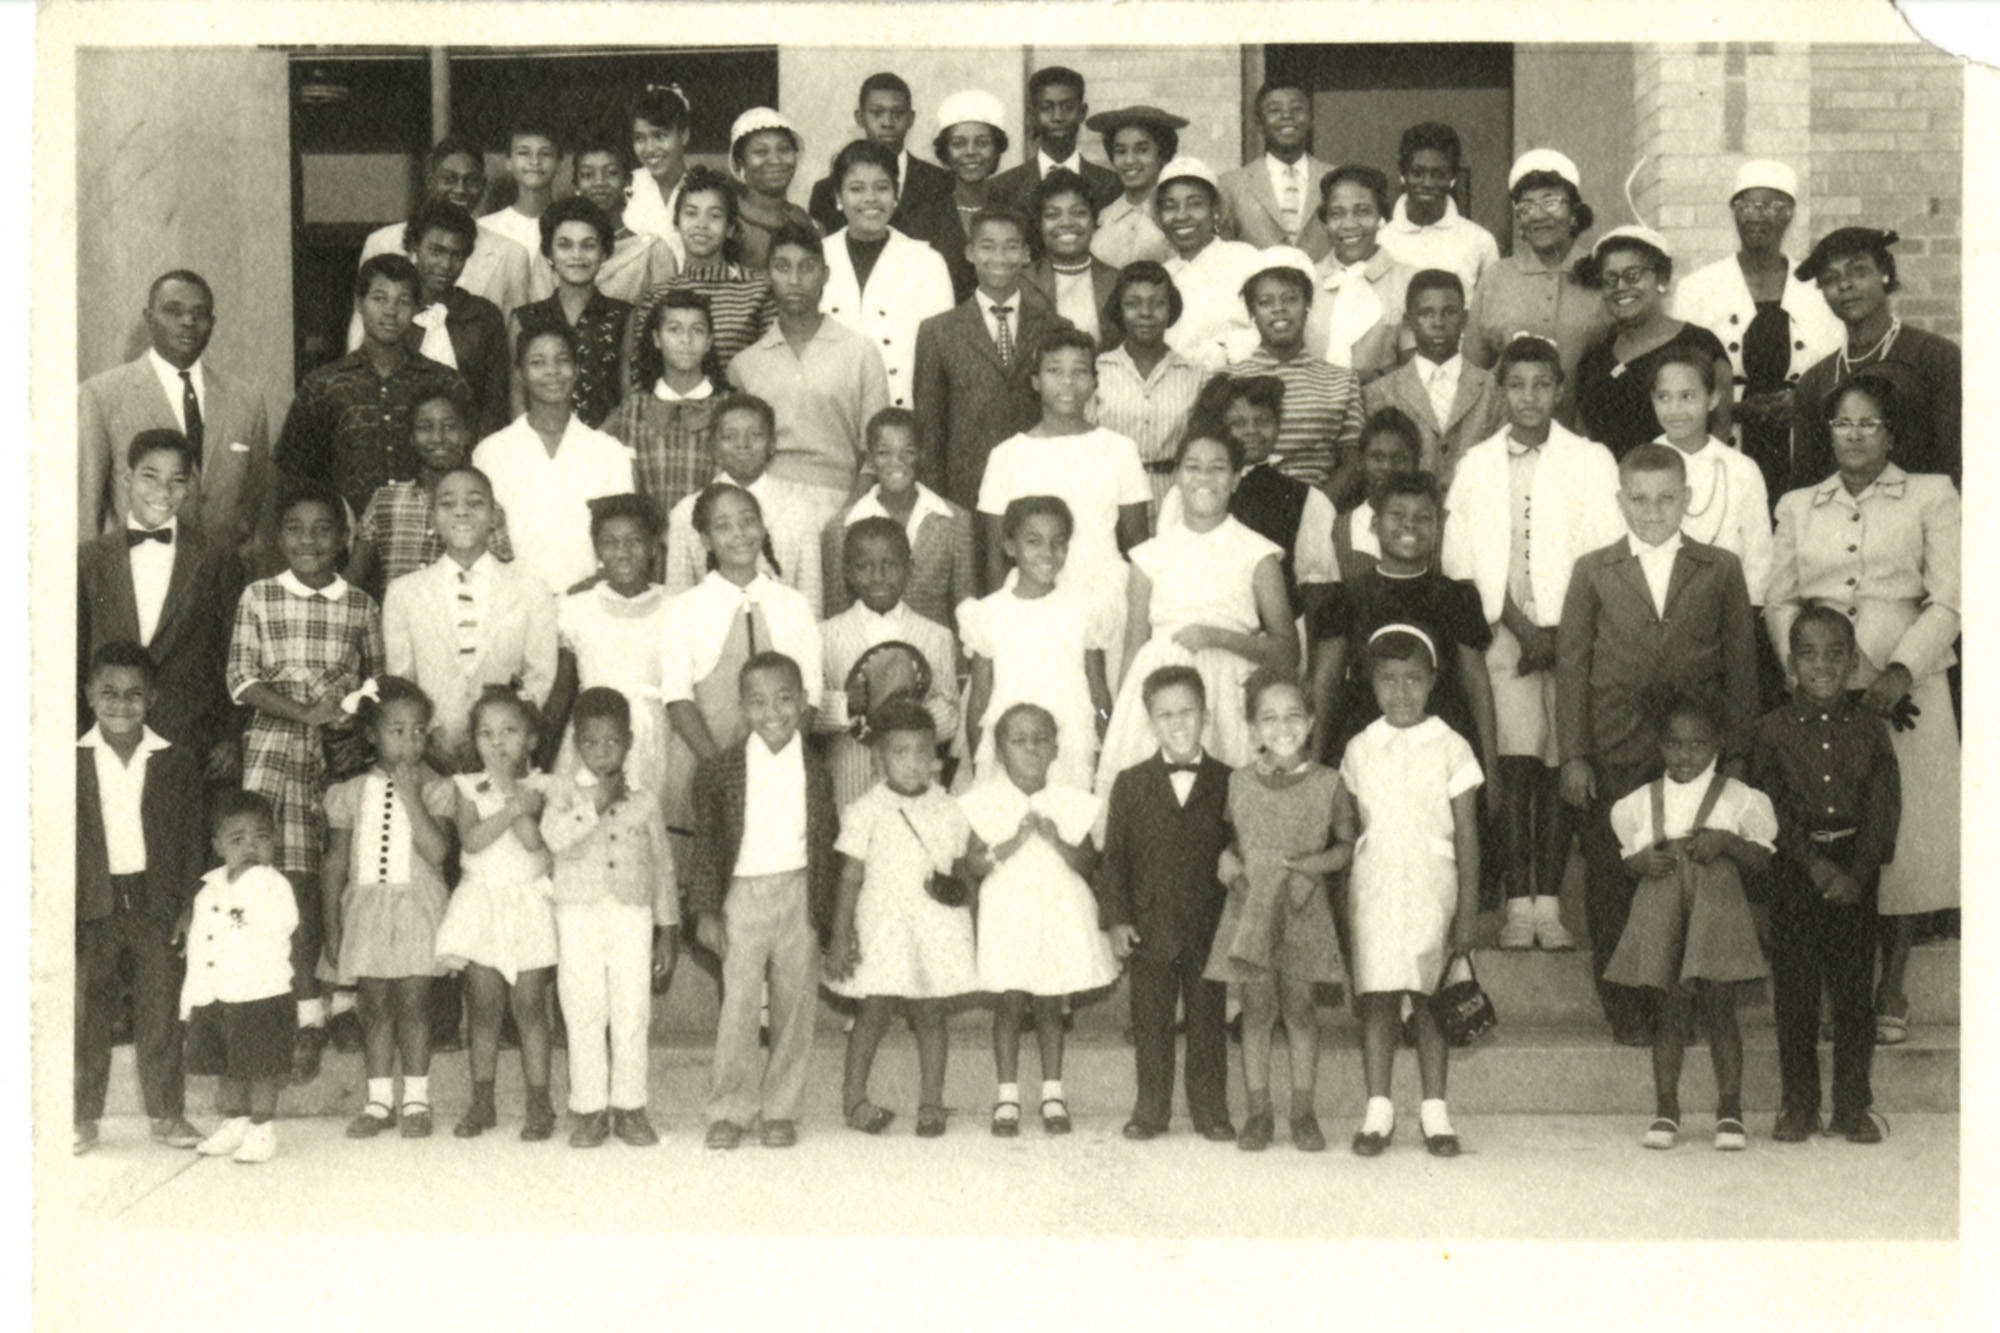 black and white photograph of members of the Ogden Baptist Church in 1960